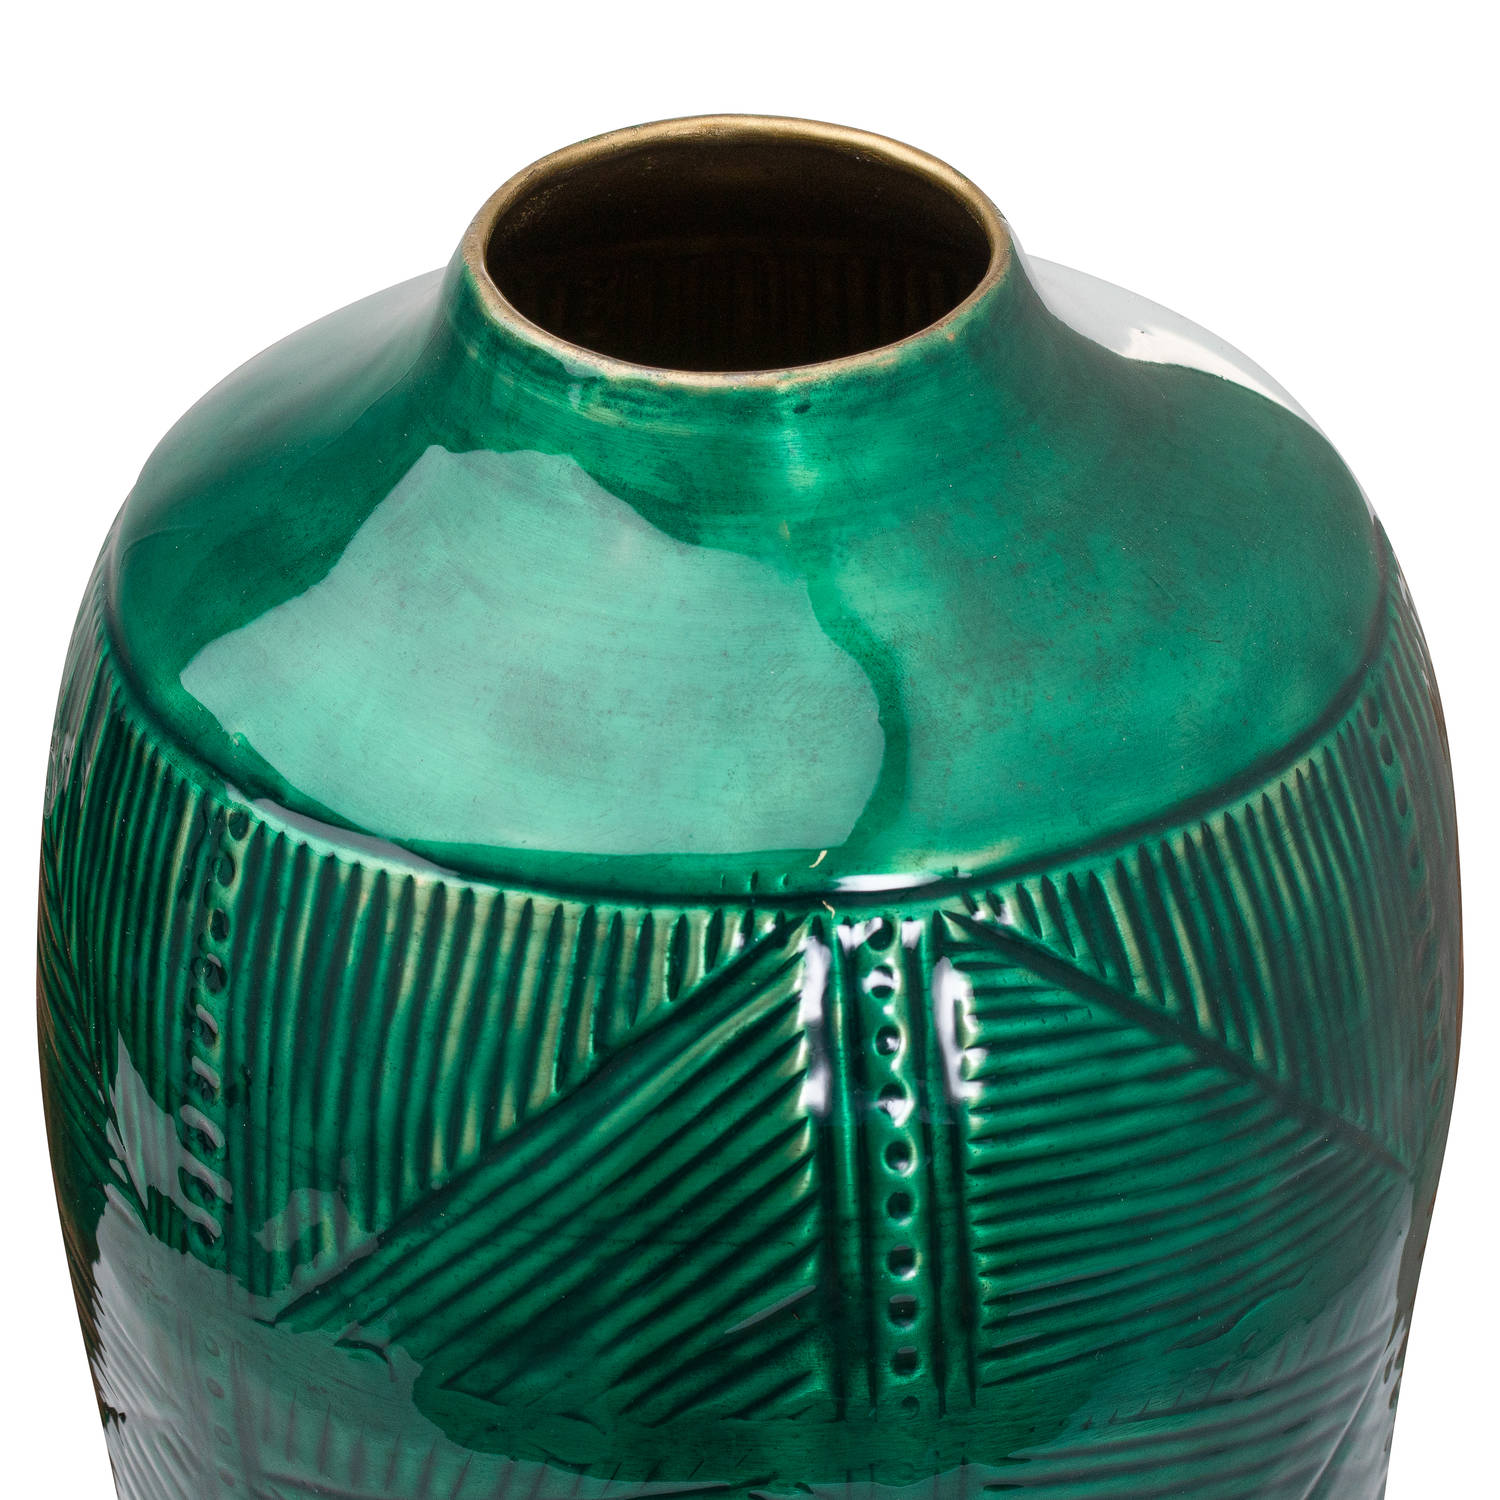 Aztec Collection Brass embossed Ceramic Dipped Urn Vase - Image 2